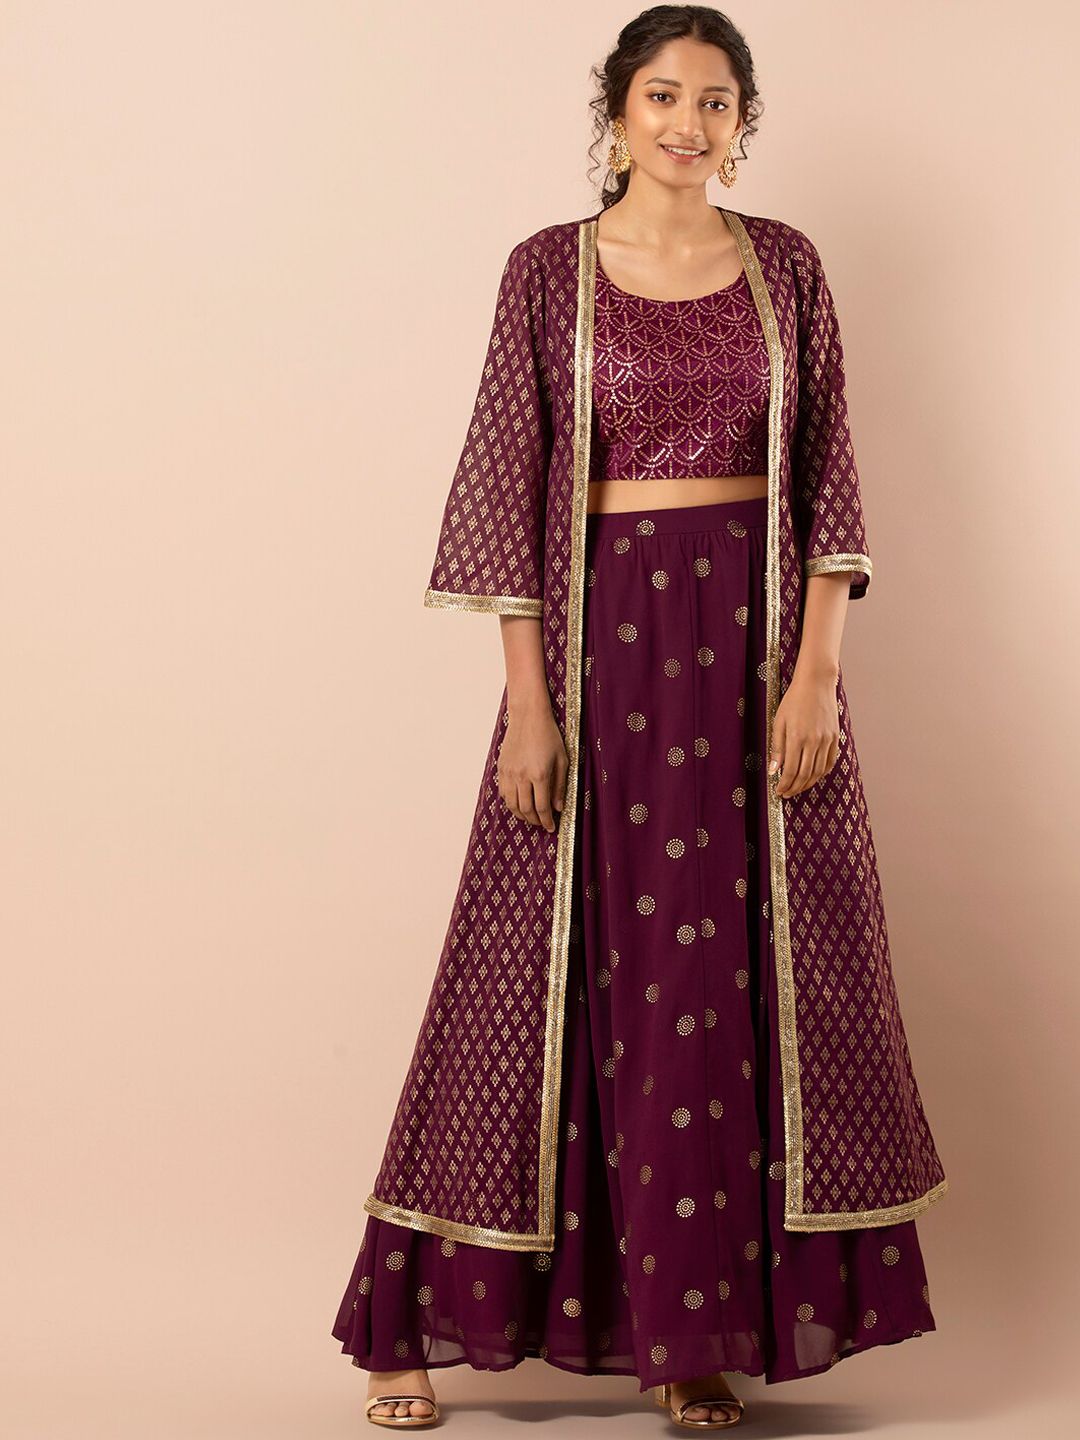 INDYA Women Purple & Gold-Colour Foil Printed Georgette Maxi Jacket Price in India